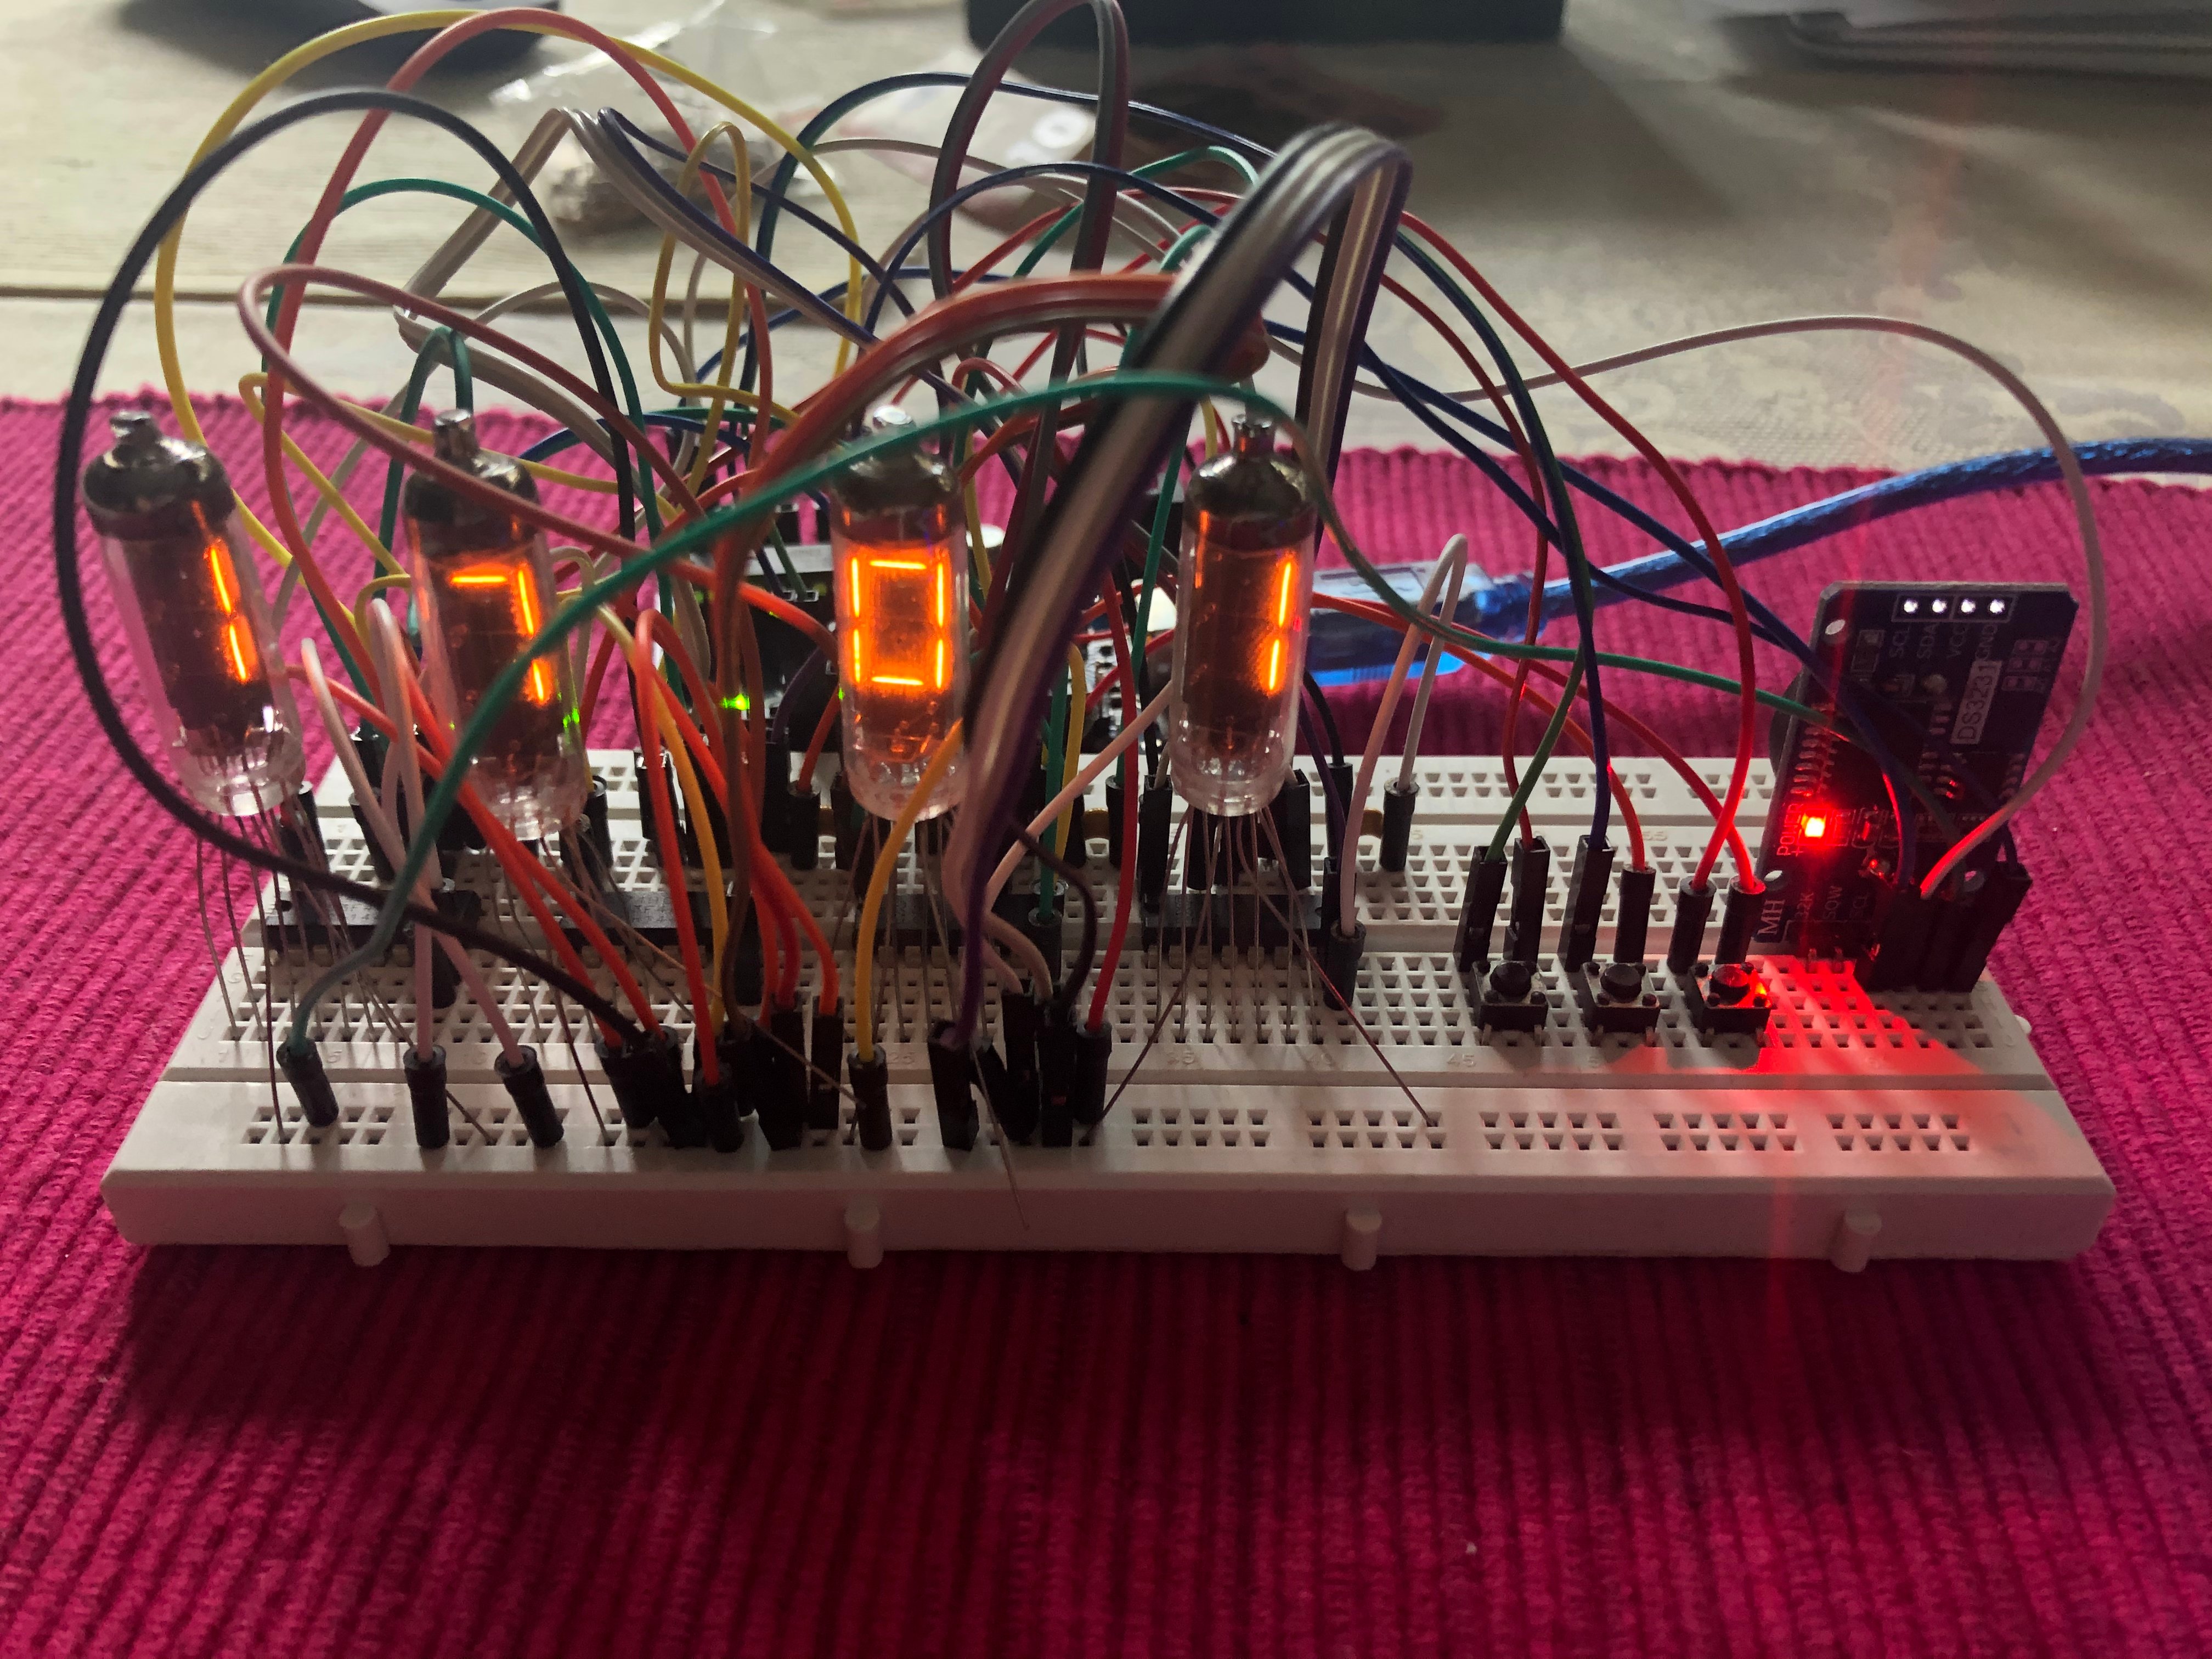 Simple numitron iv-9 desk clock using 4 shift registers, Arduino Uno(or equivalent) and ds3231 RTC clock